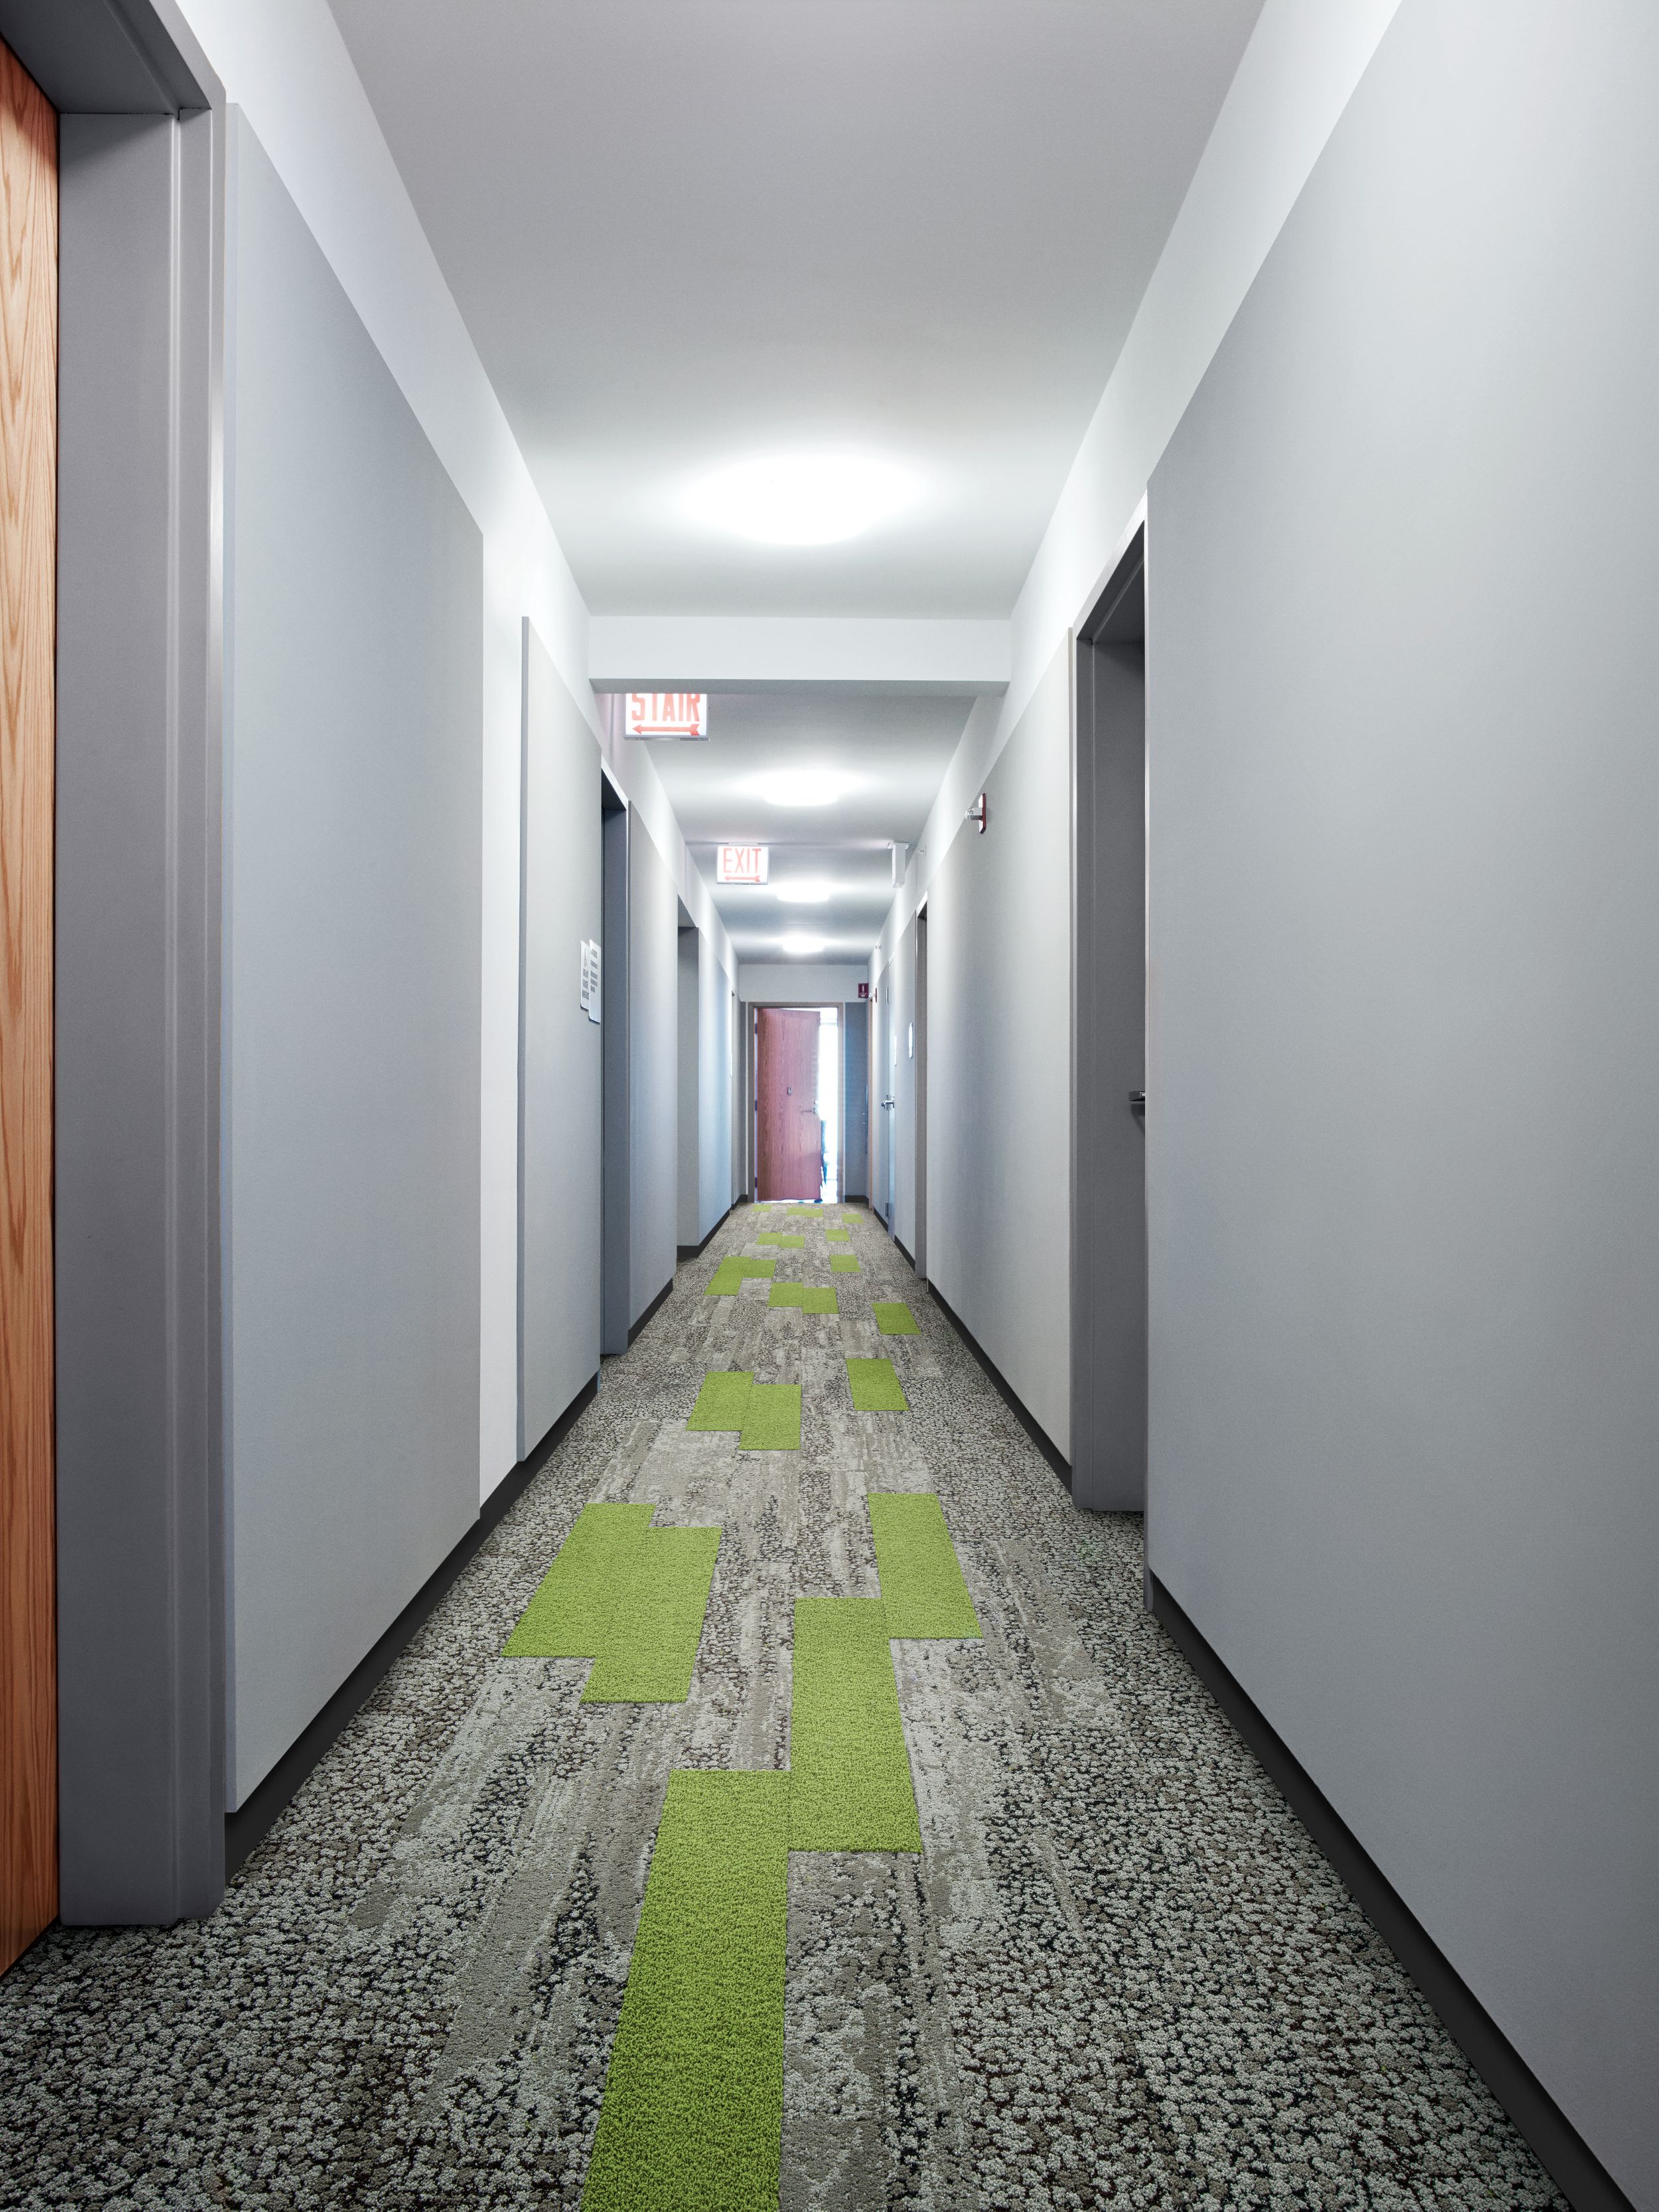 image Interface HN830 and HN850 plank carpet tiles in long corridor with mutliple doors and wood door at end numéro 6